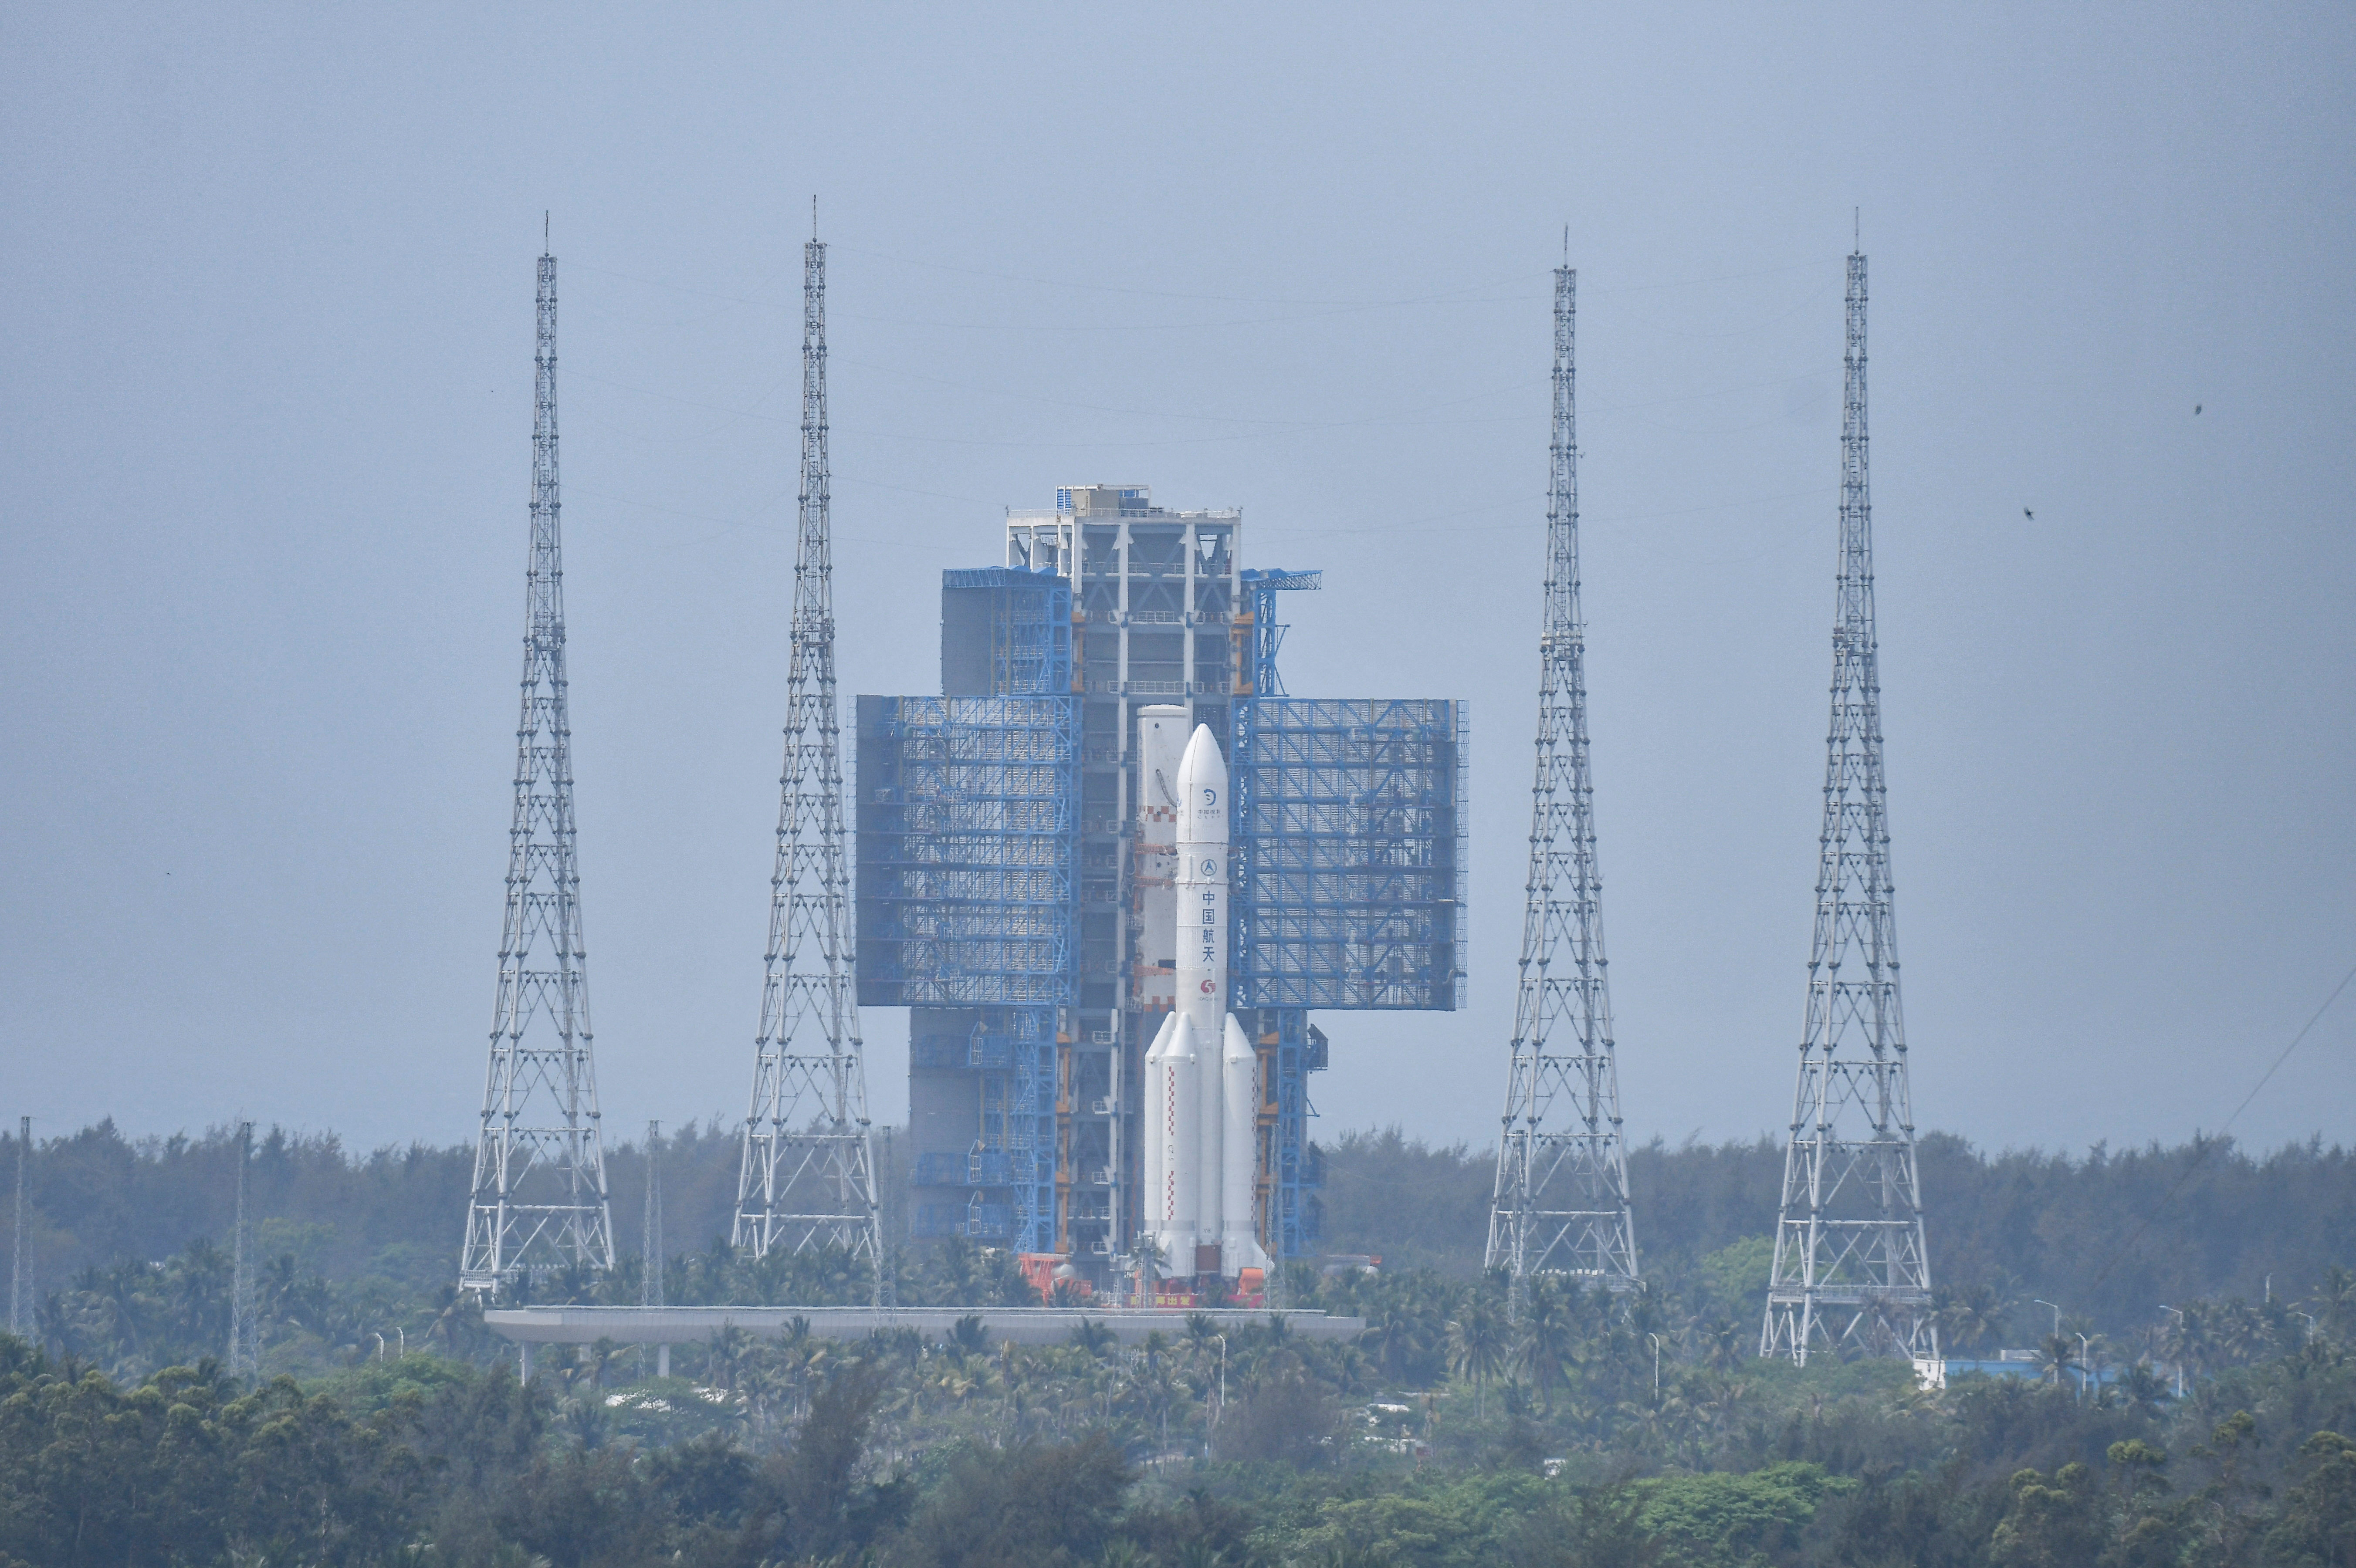 The Chang'e 6 lunar probe and the Long March-5 Y8 carrier rocket combination sit atop the launch pad at the Wenchang Space Launch Site in Hainan